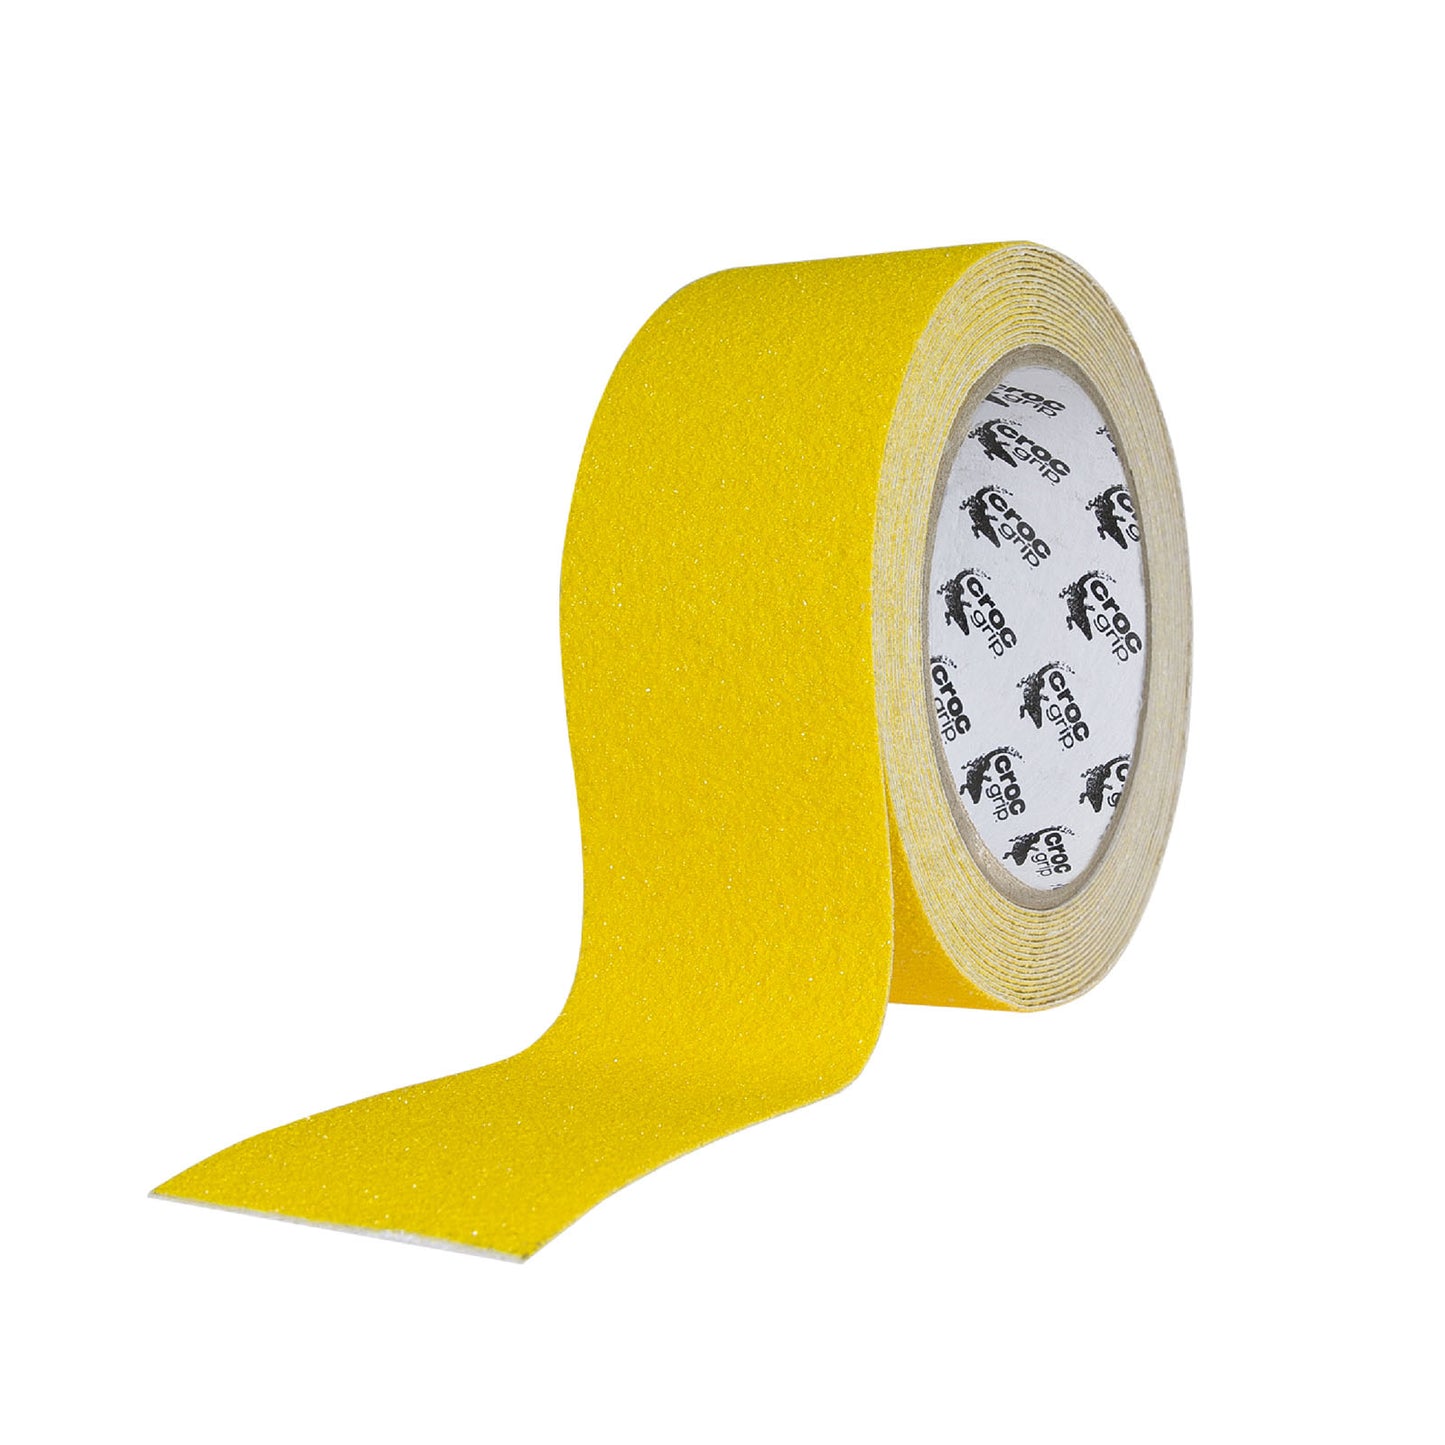 5M x 48MM Yellow Commercial High Grit Anti-Slip Tape